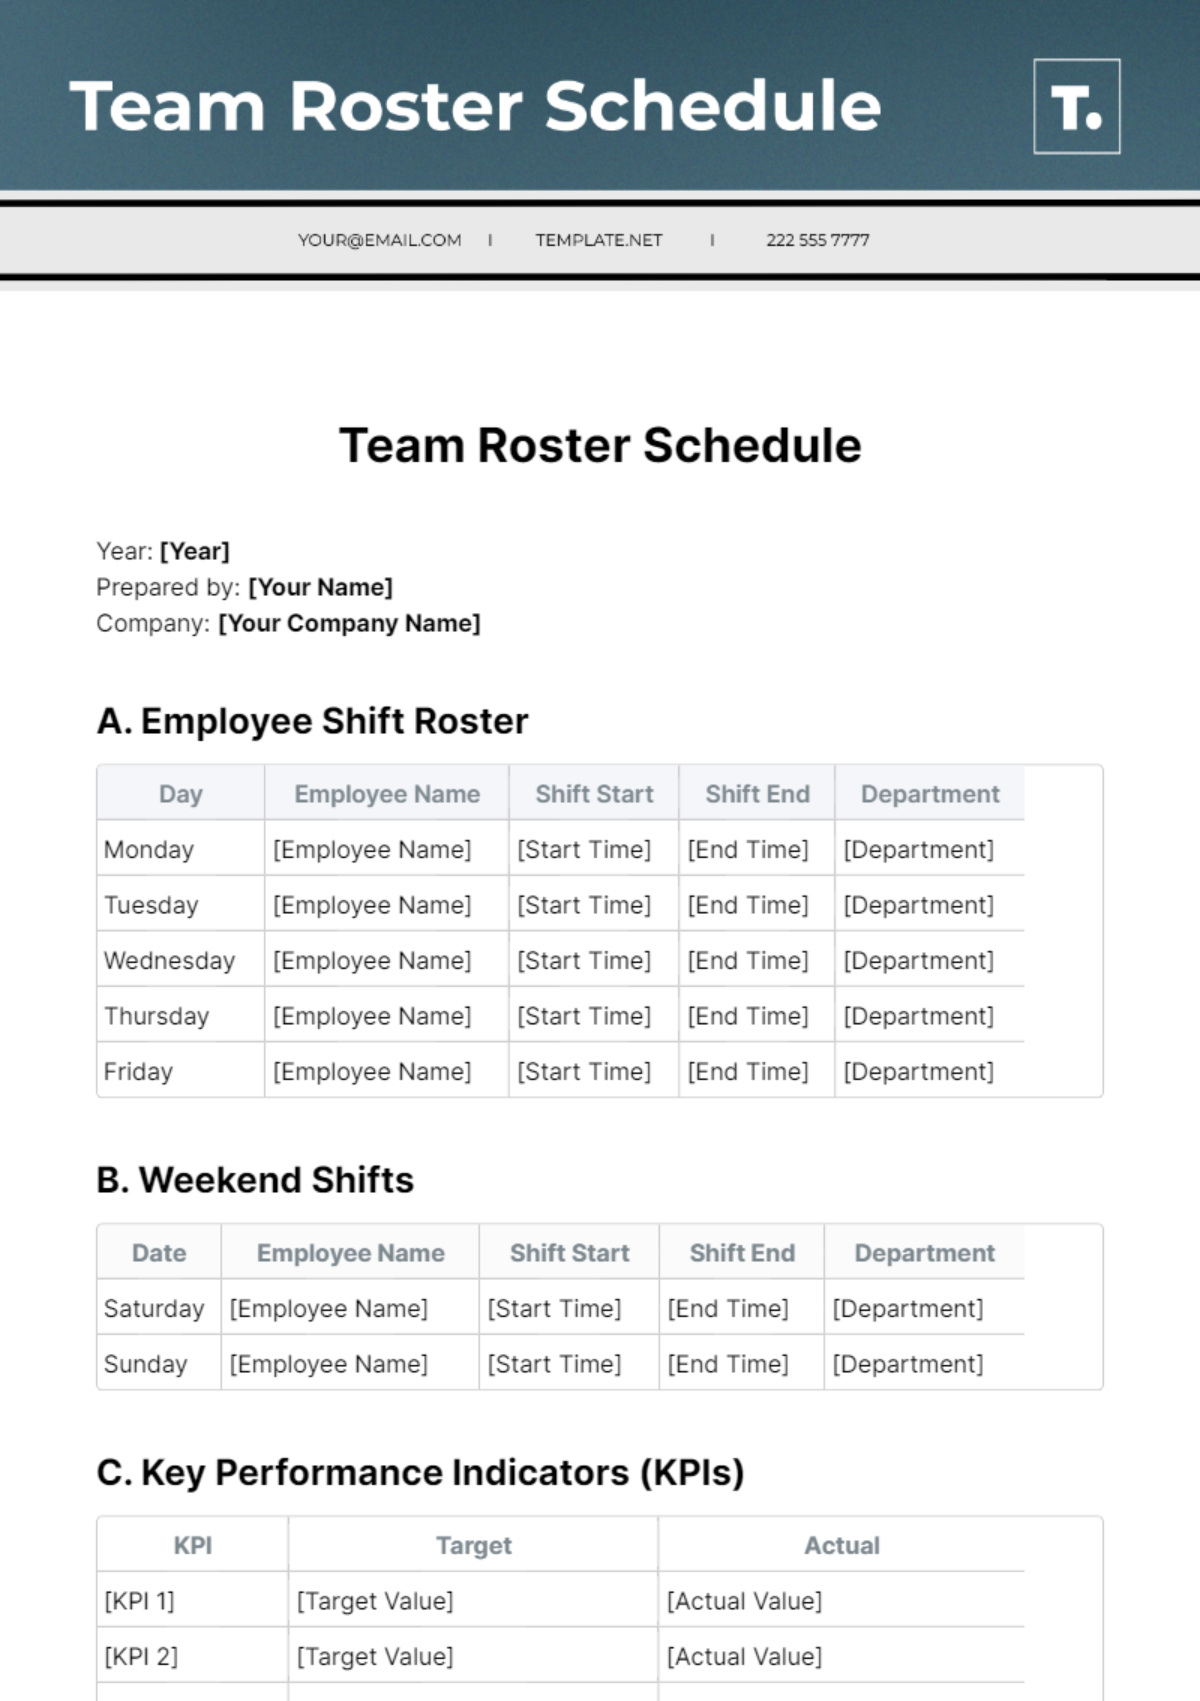 Team Roster Schedule Template